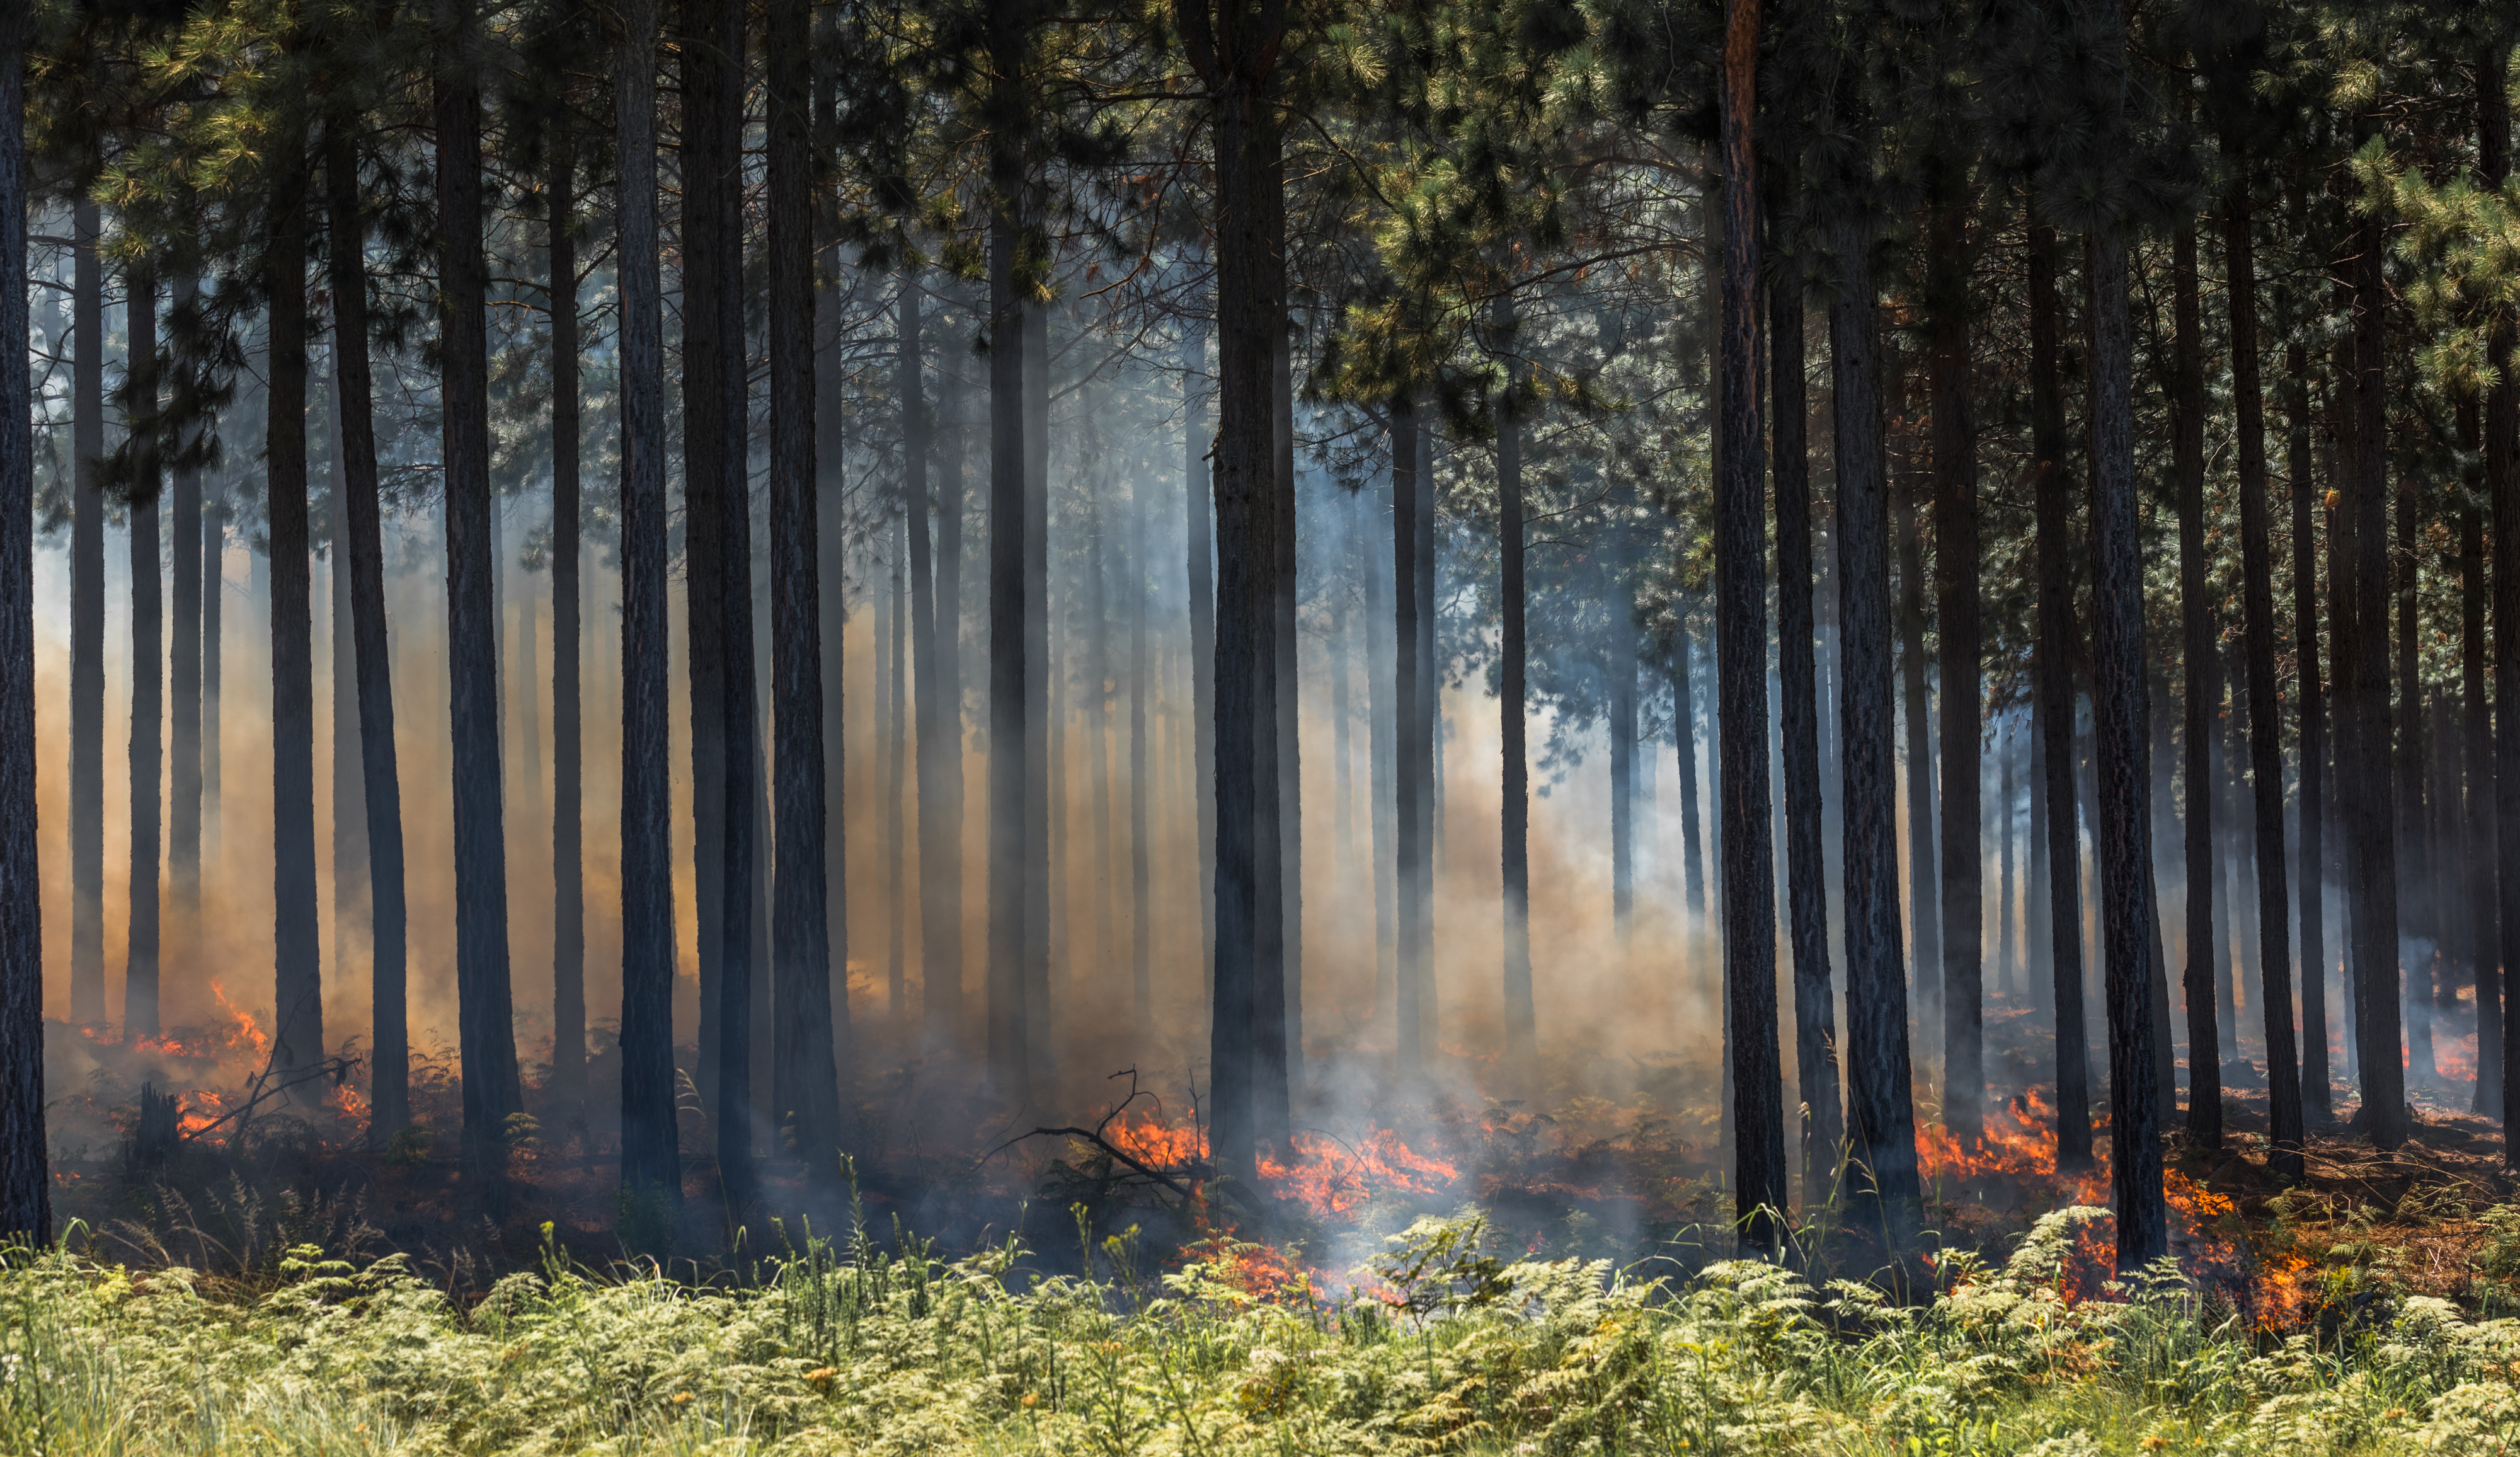 Highly detailed image of wildfire, fire in a forest.